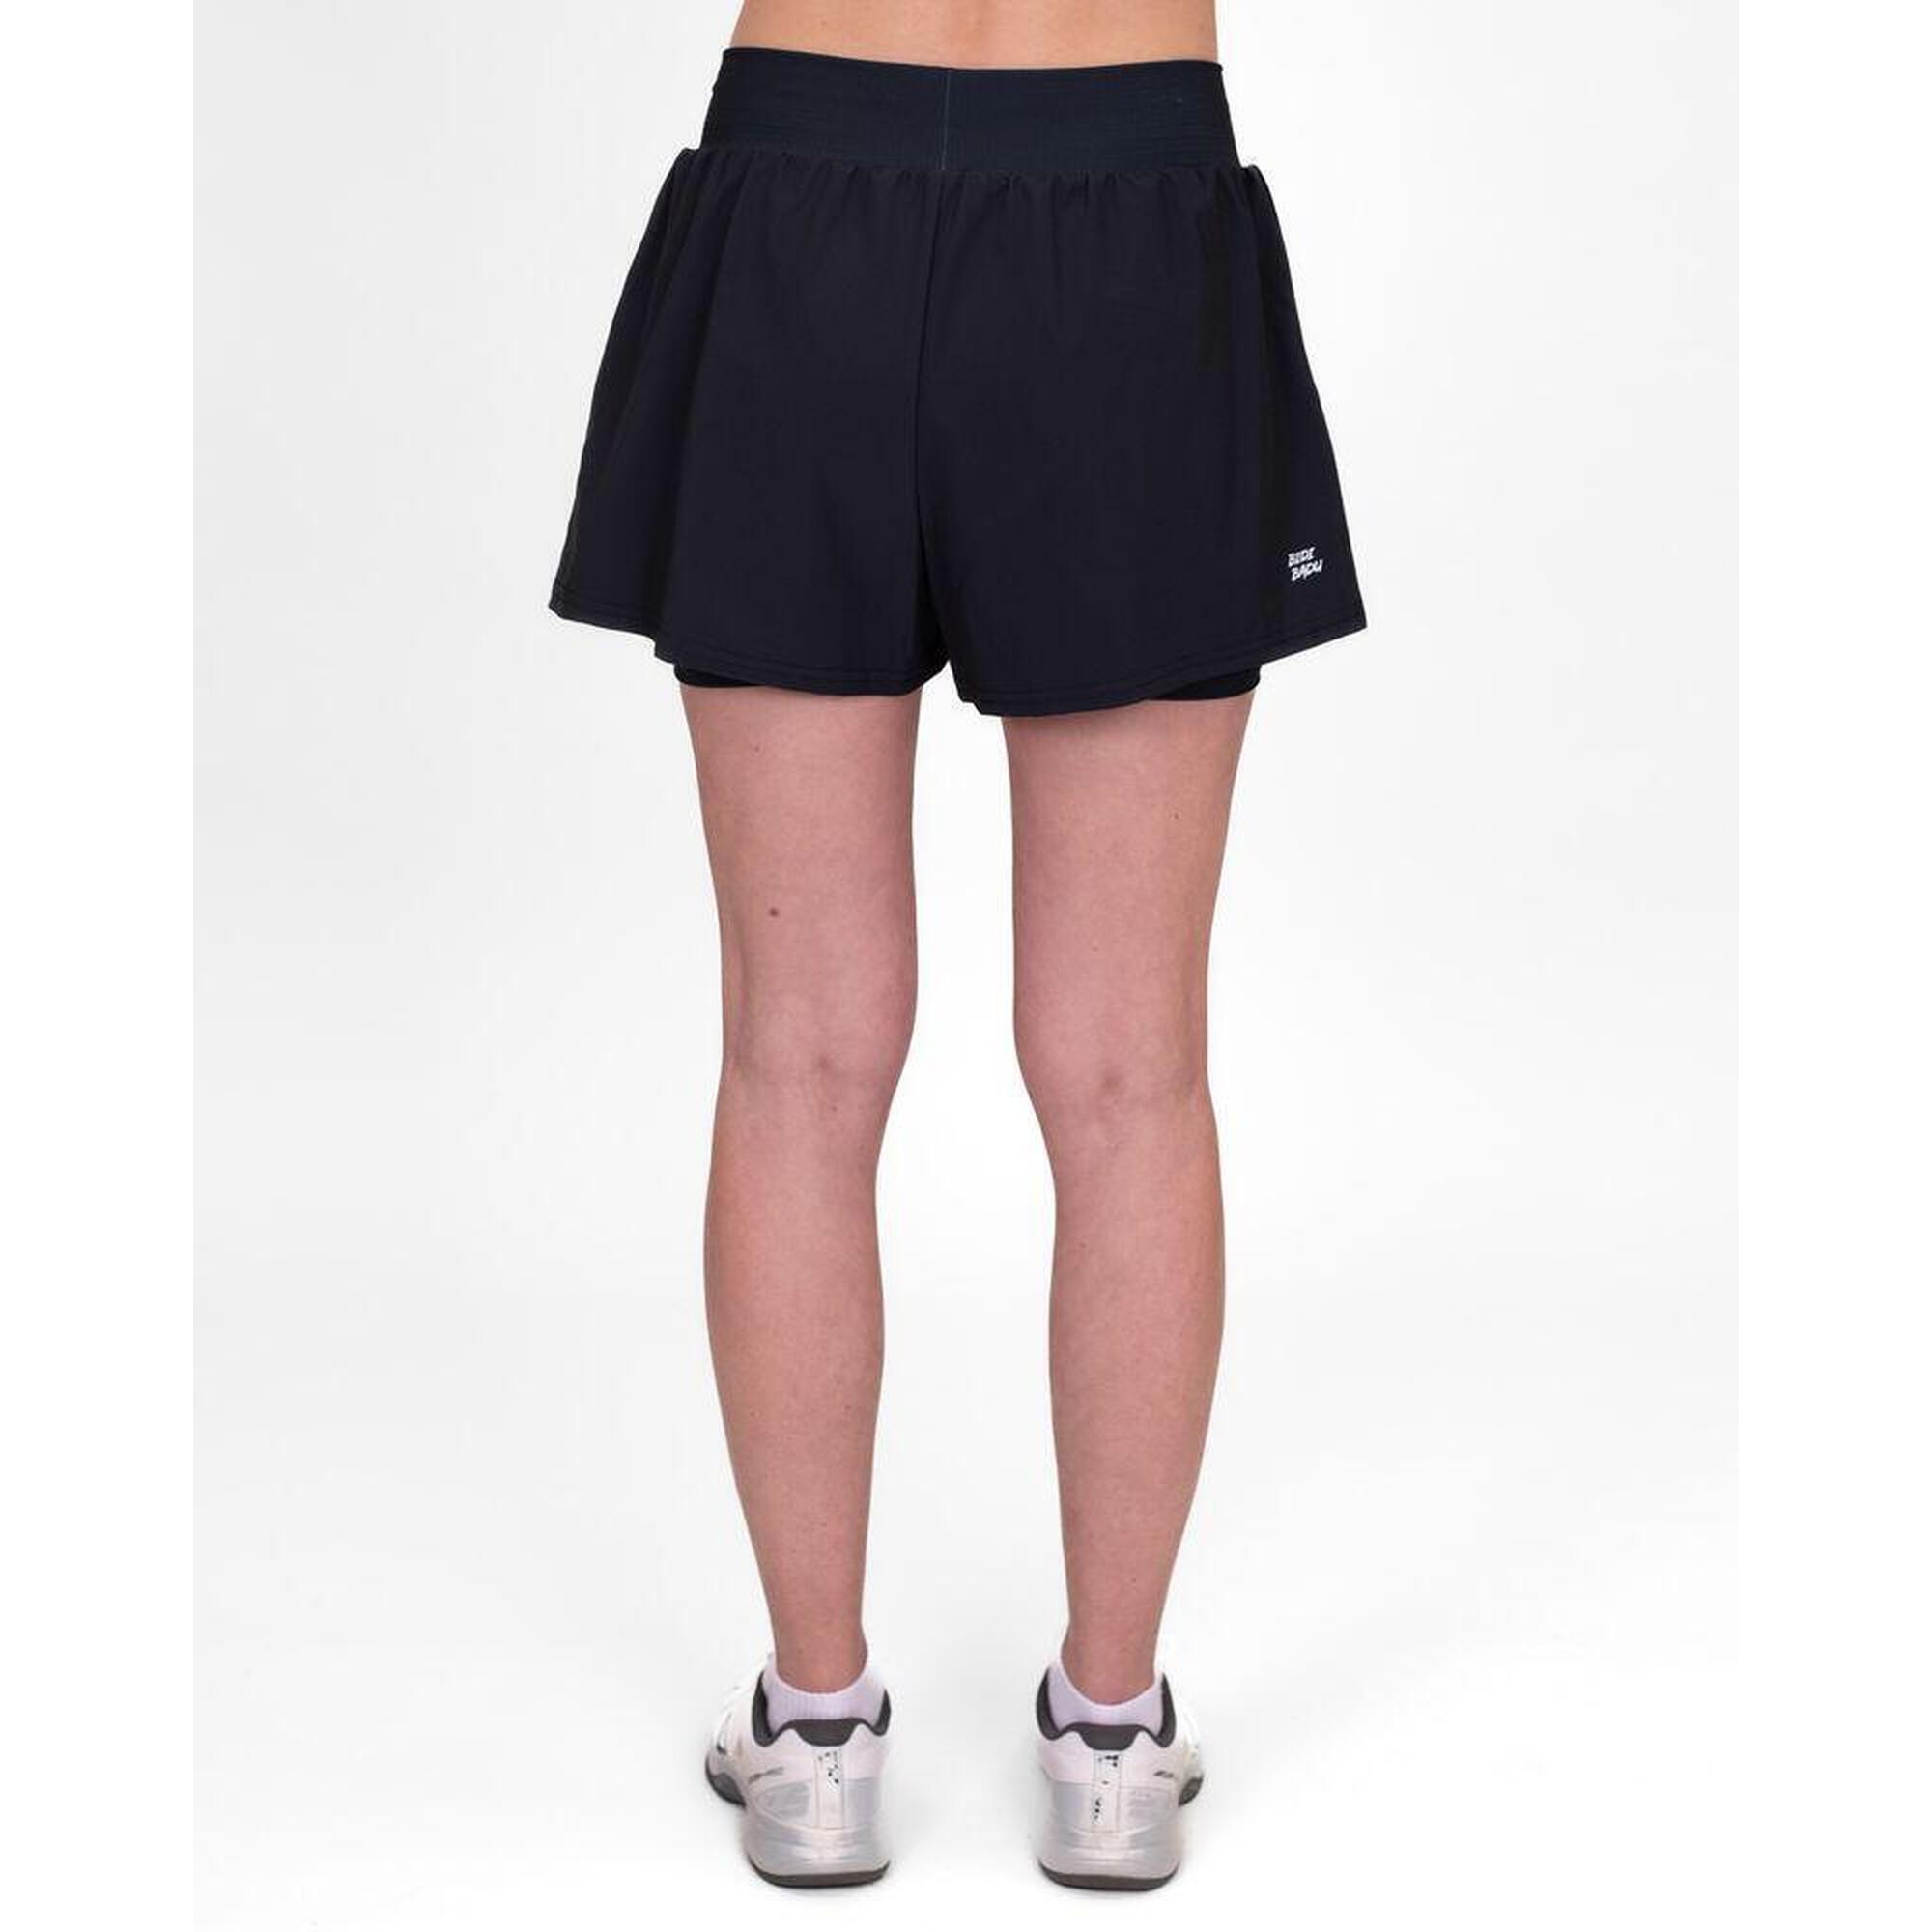 Crew 2In1 Shorts - pink